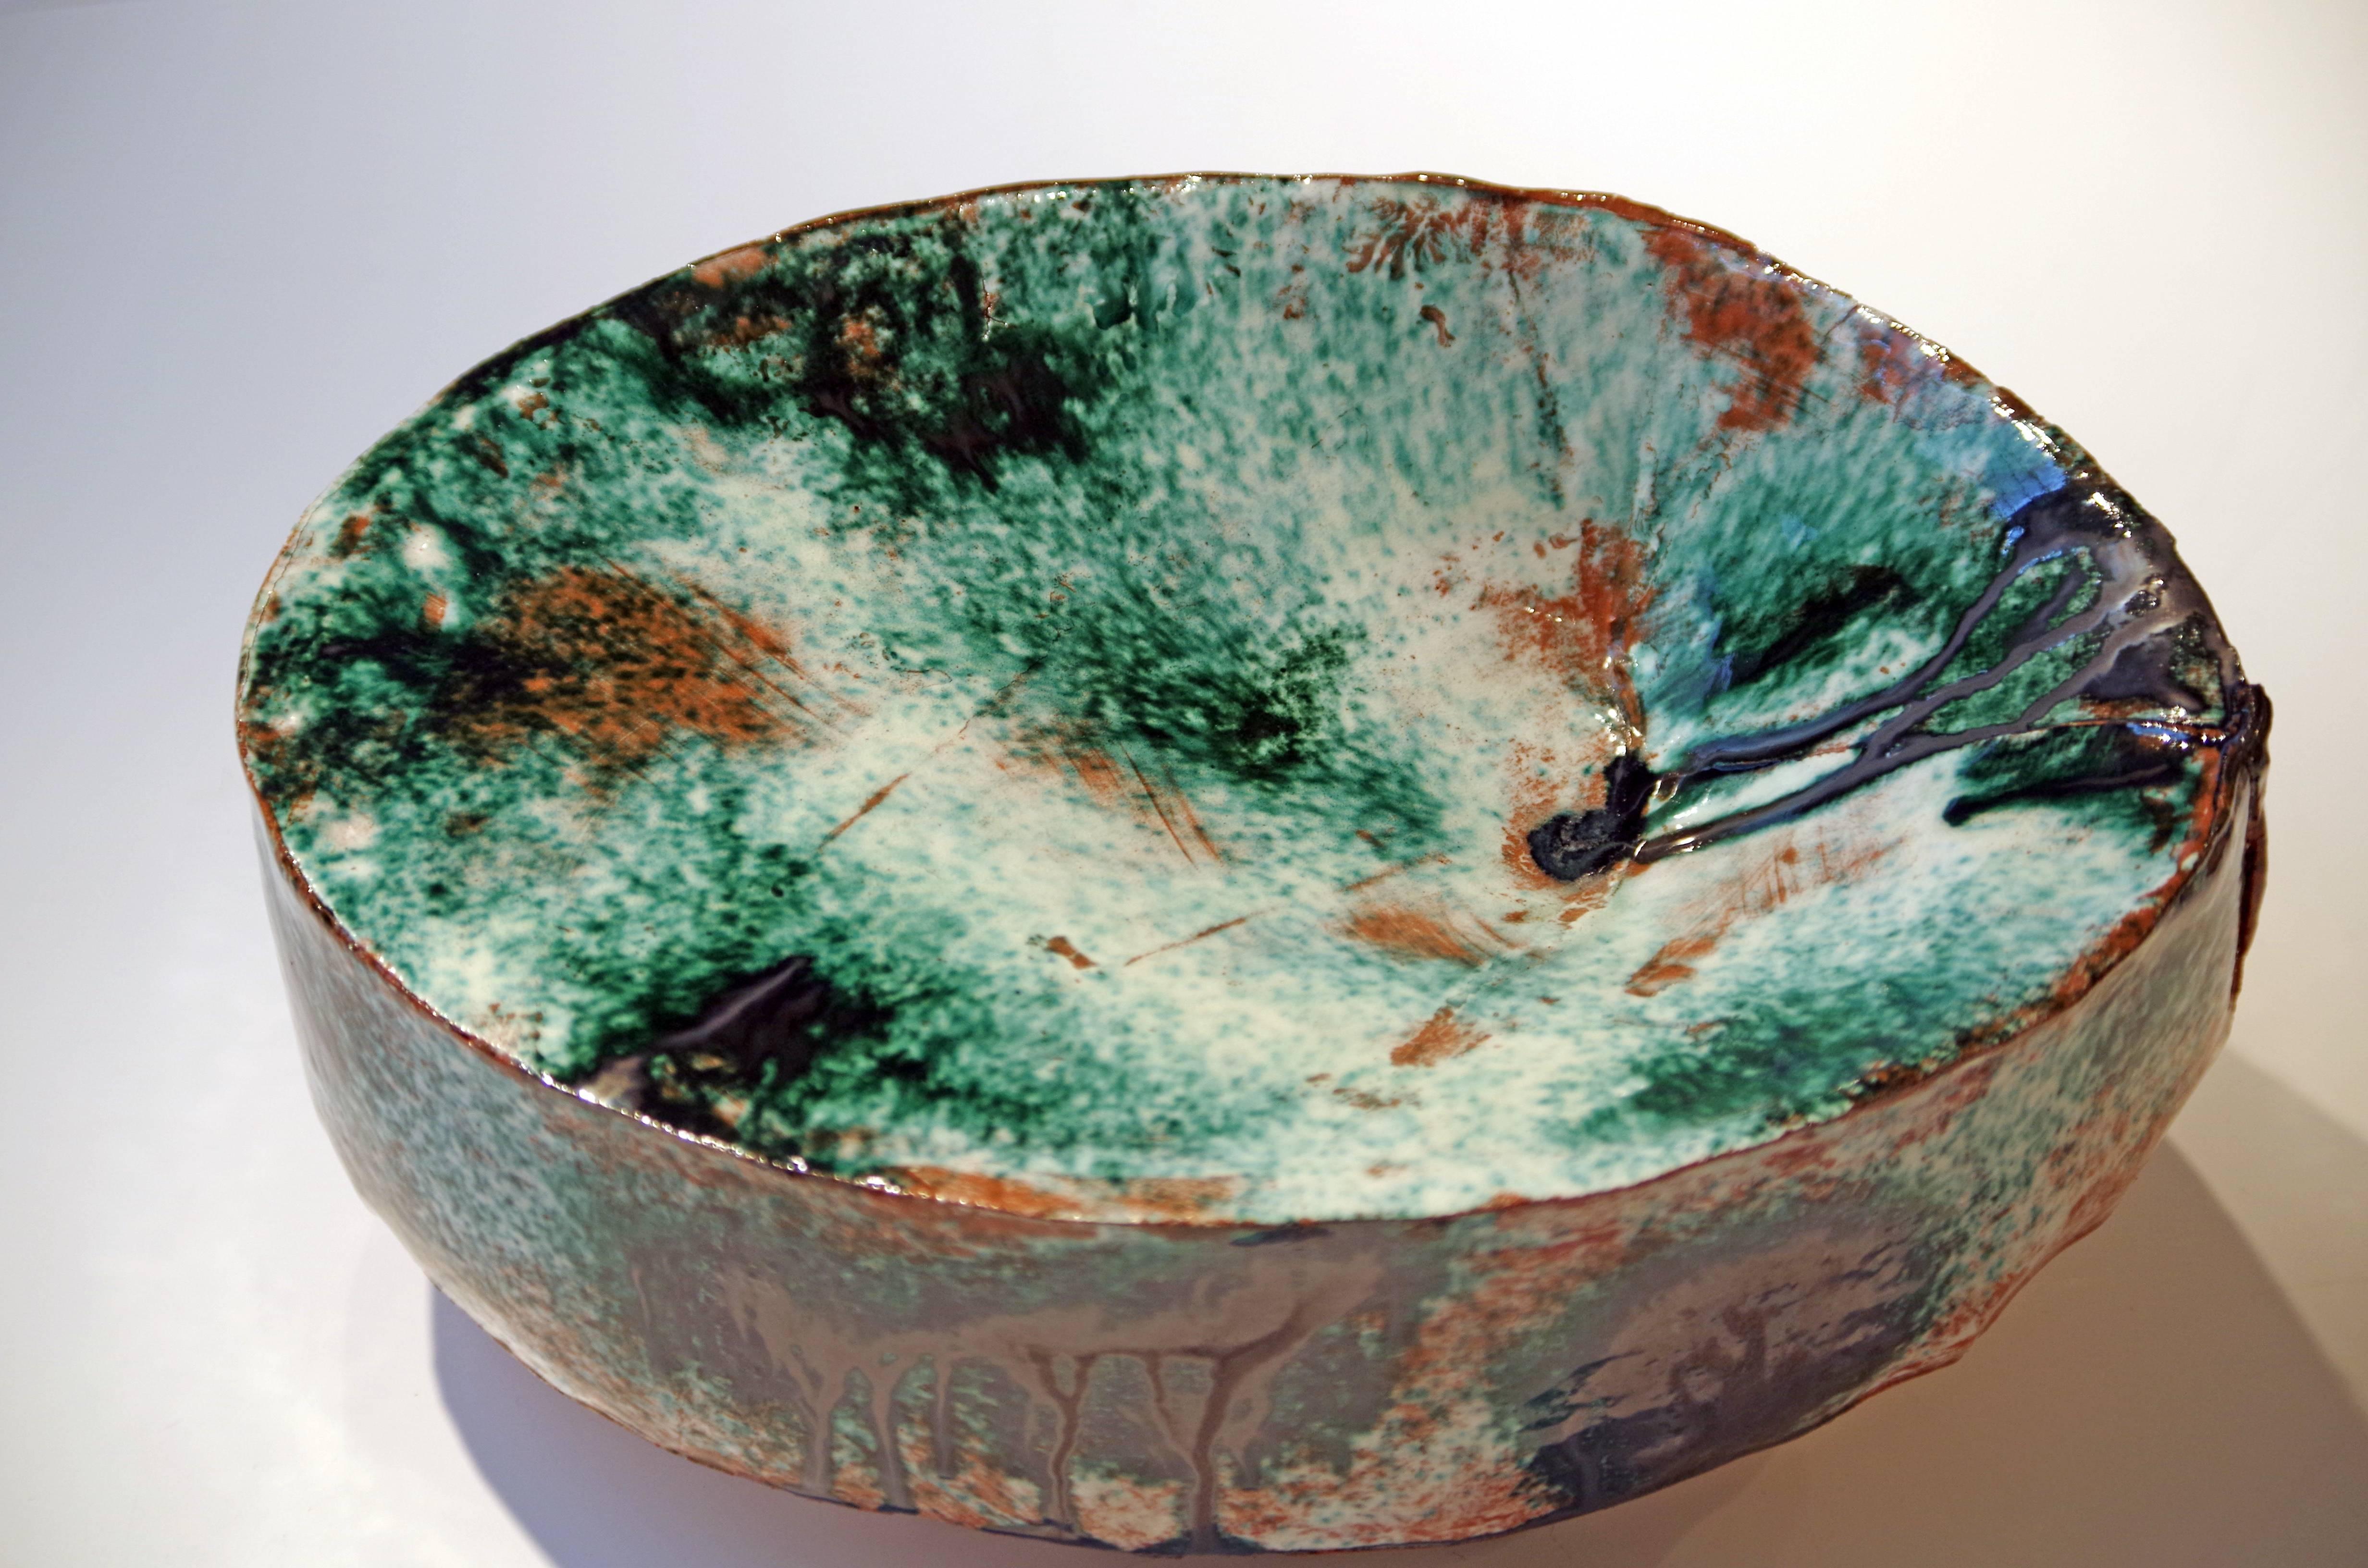 Contemporary ceramicist Brian Molanphy is inspired by the peaks and valleys seen on mountainous hikes. He plays with glazes and firing methods to create unique, contemporary end results that are different for each piece. This swell is formed from